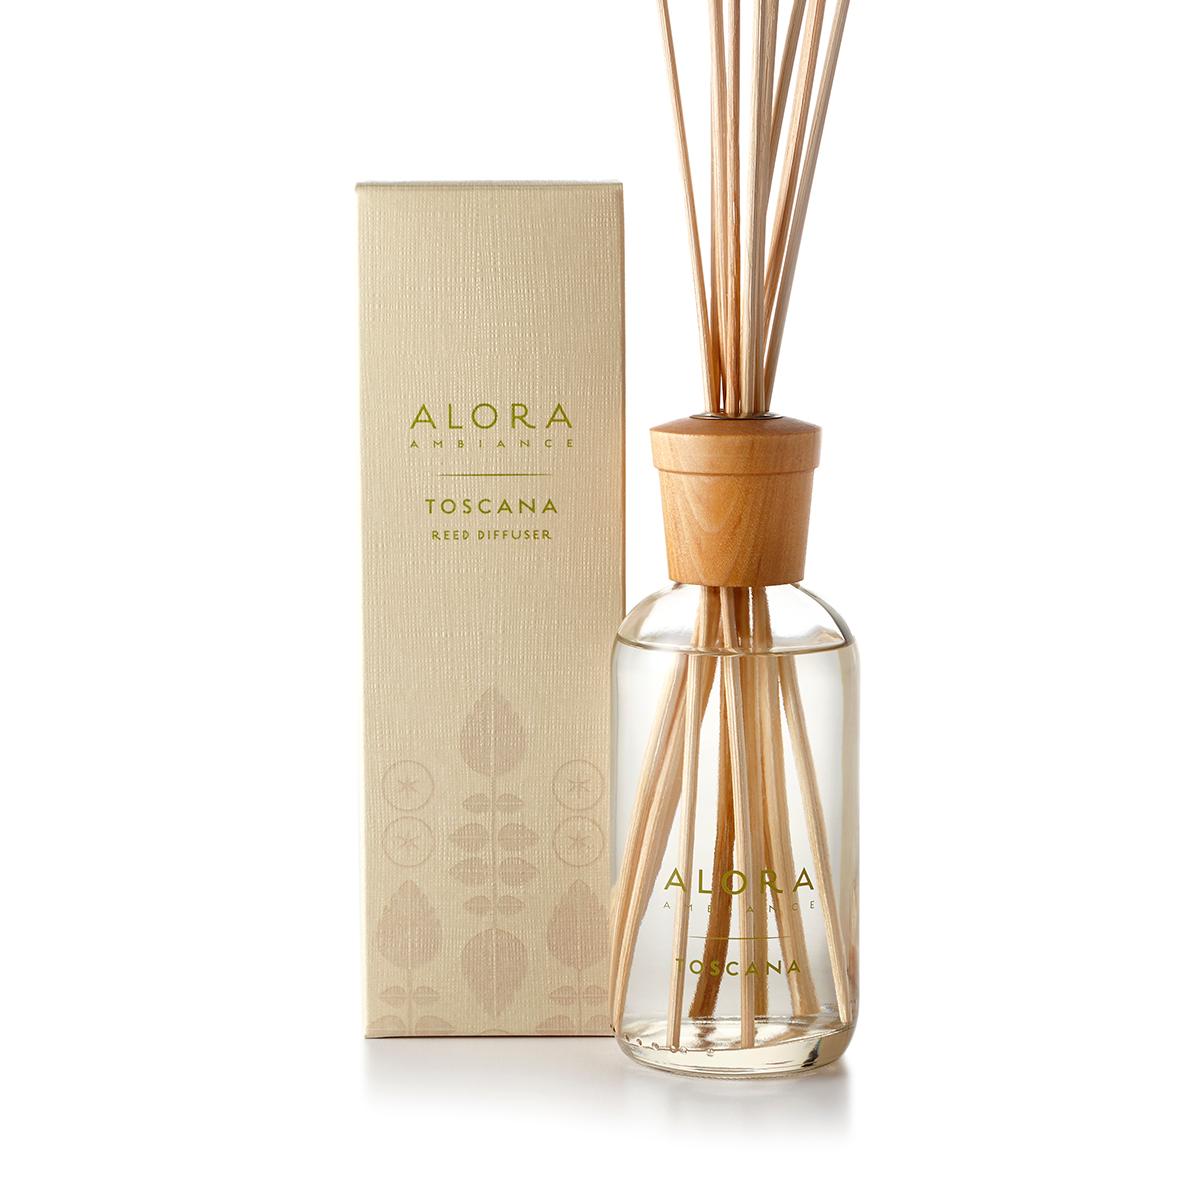 Primary image of Toscana Reed Diffuser